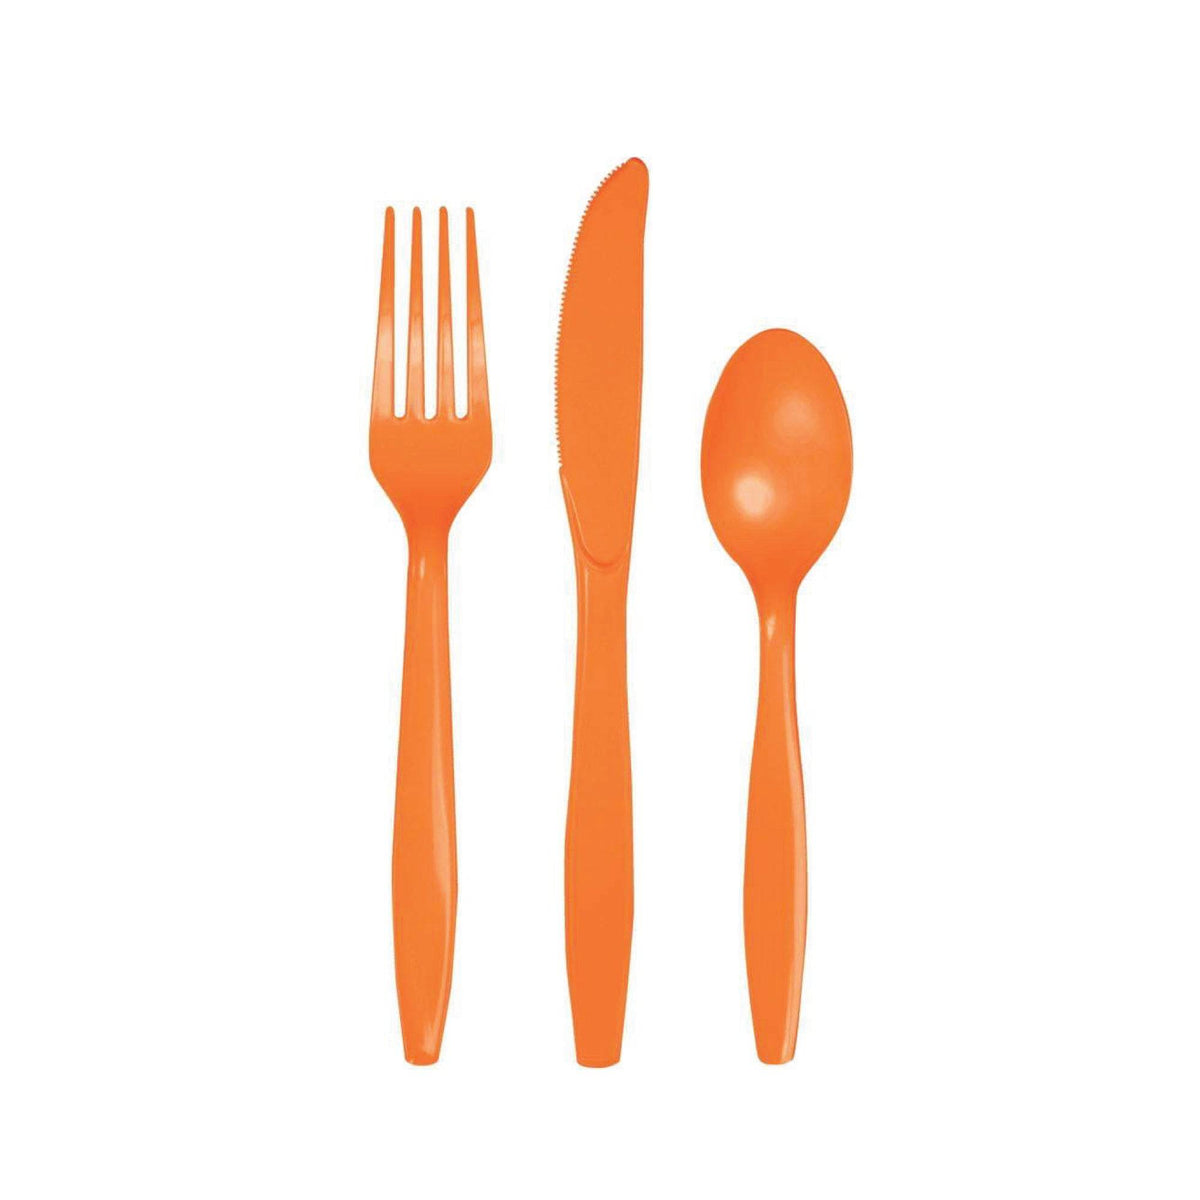 Woodland Theme - Kids Cutlery Fork and Spoon Set